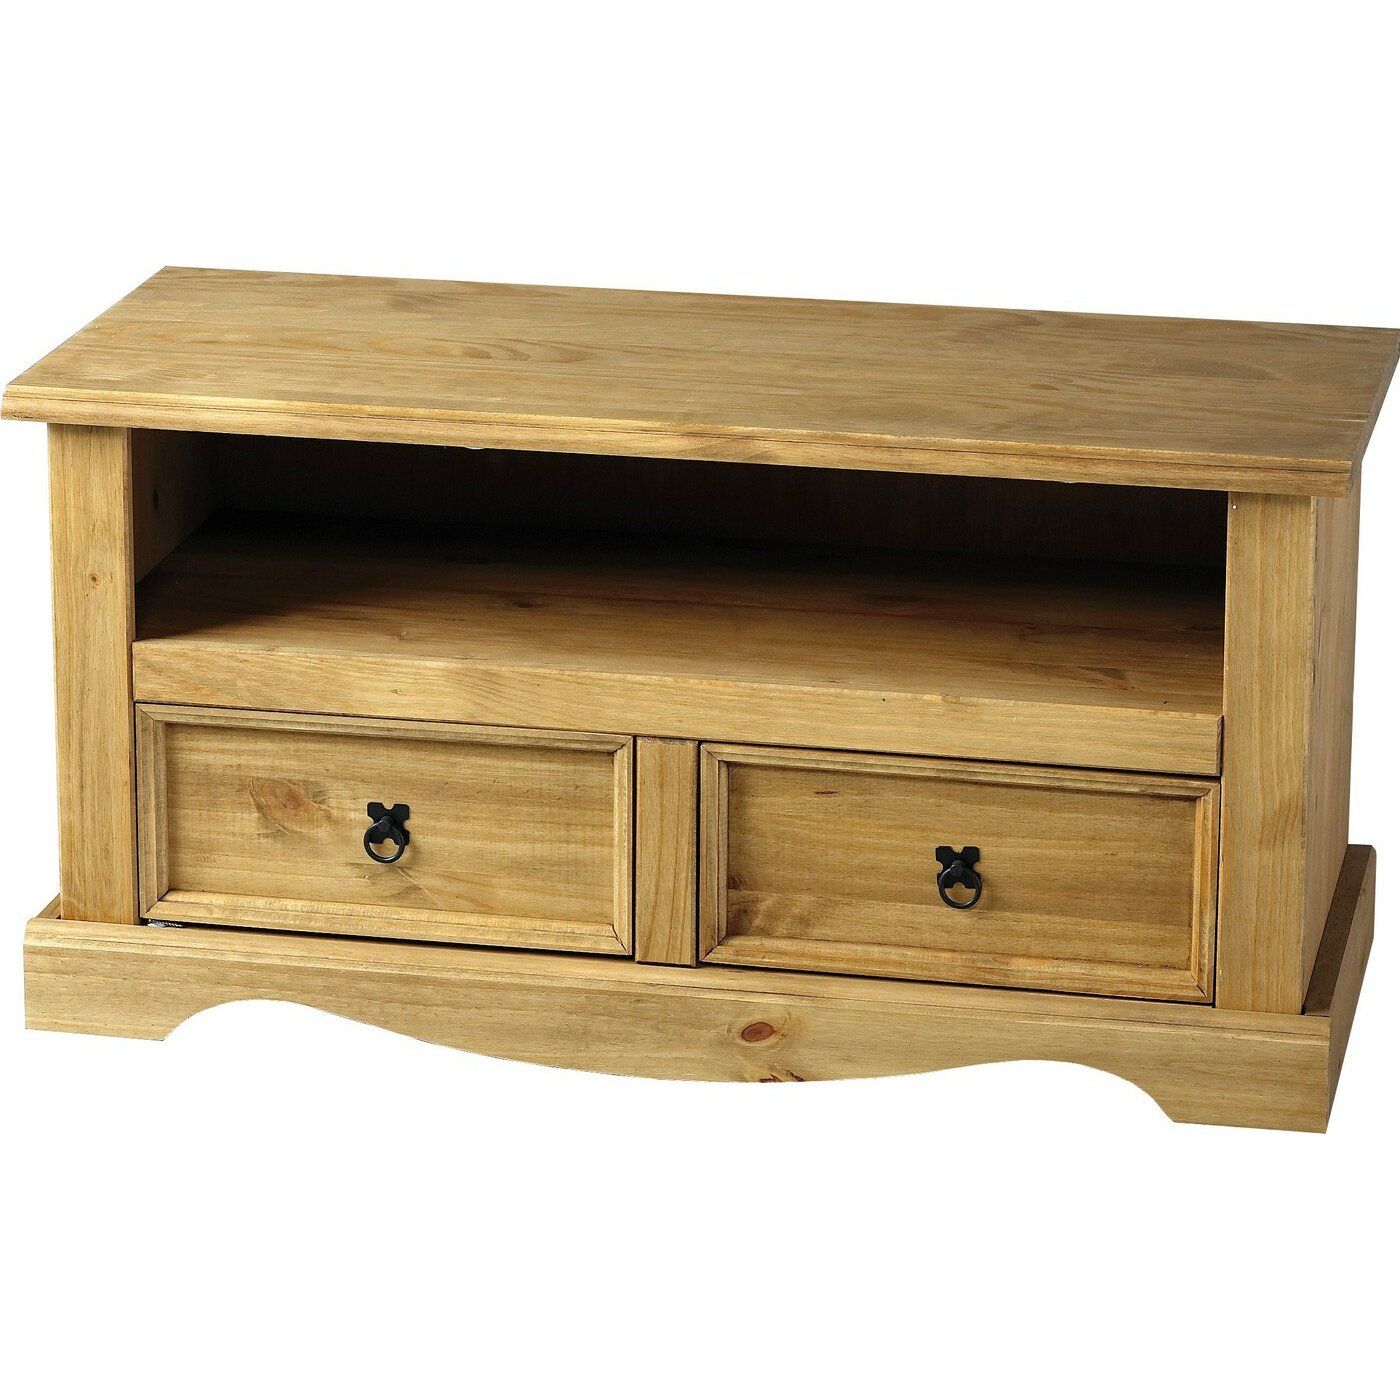 Andover Mills Classic Corona Tv Stand For Tvs Up To 50 Intended For Corona Tv Stands (View 13 of 15)